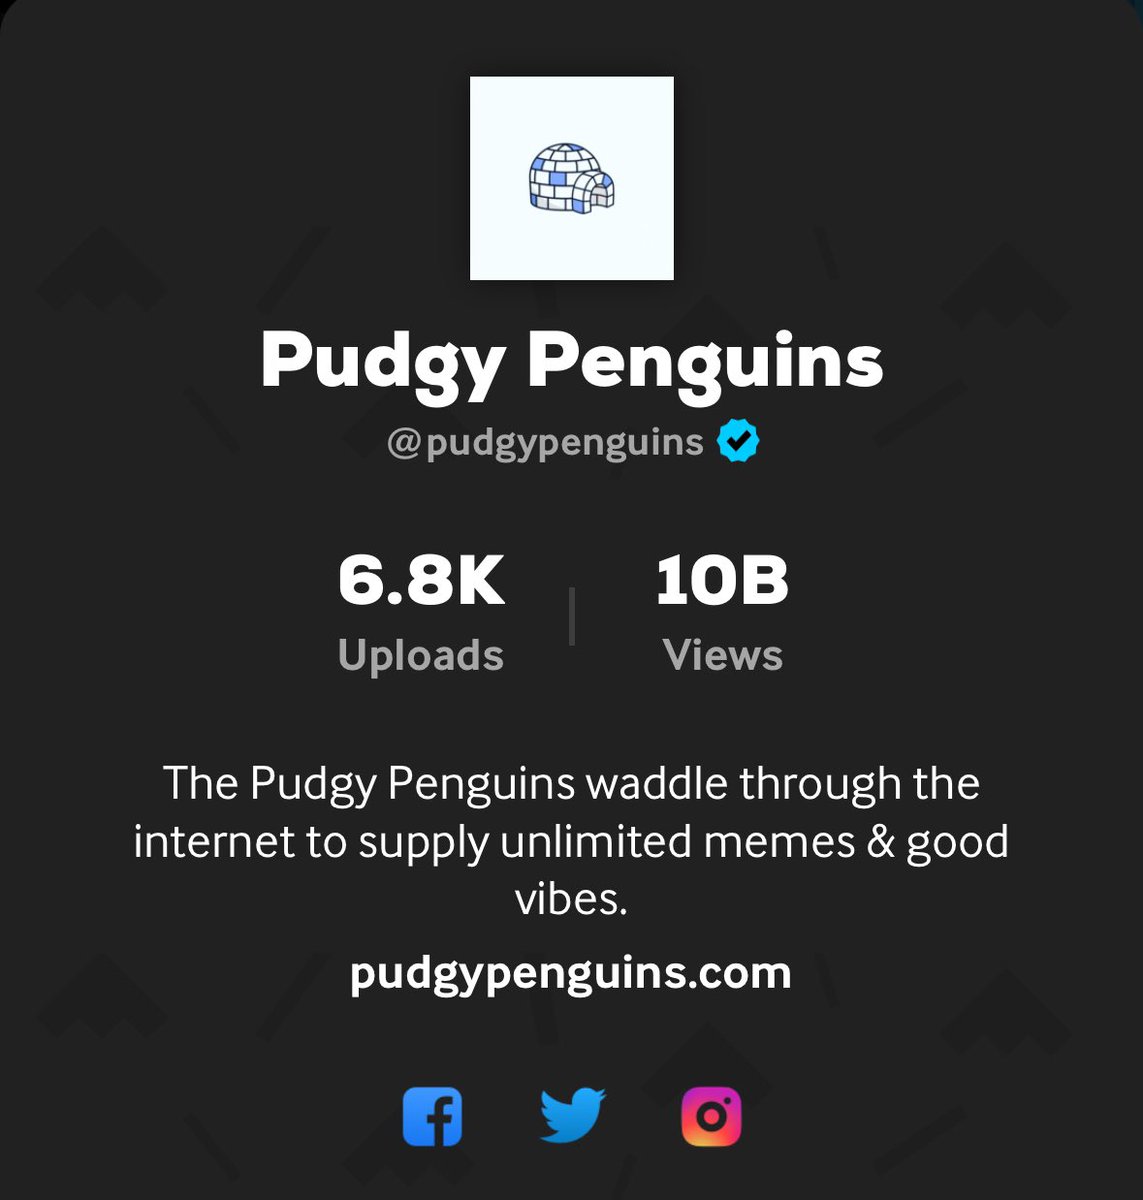 The Pudgy Penguins GIFs and stickers on GIPHY have reached 10B views. With 10B views and millions more each day, our GIFs allow us to cement the Pudgy Penguins IP in internet culture, becoming a brand people interact with every day.